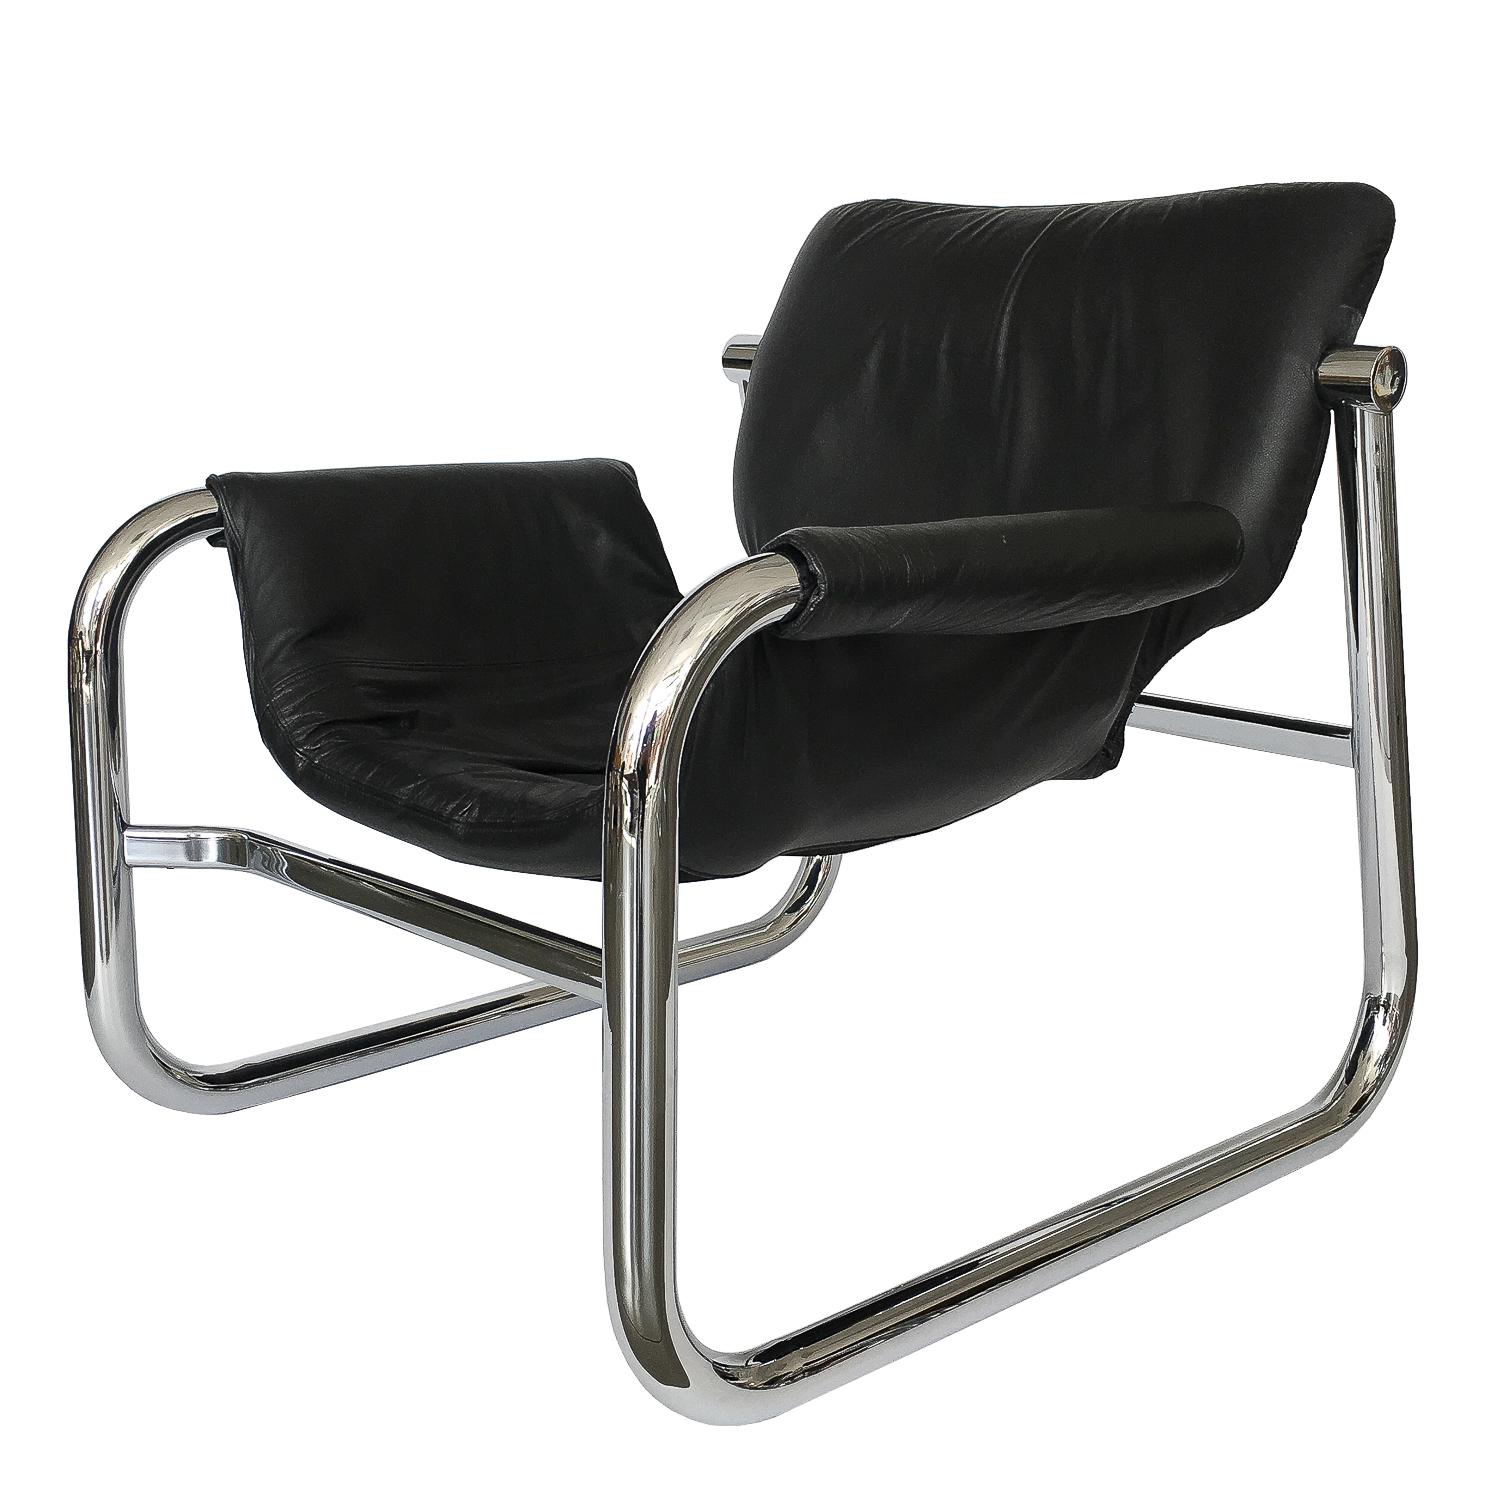 "Alpha" Lounge Chair by Maurice Burke for Pozza